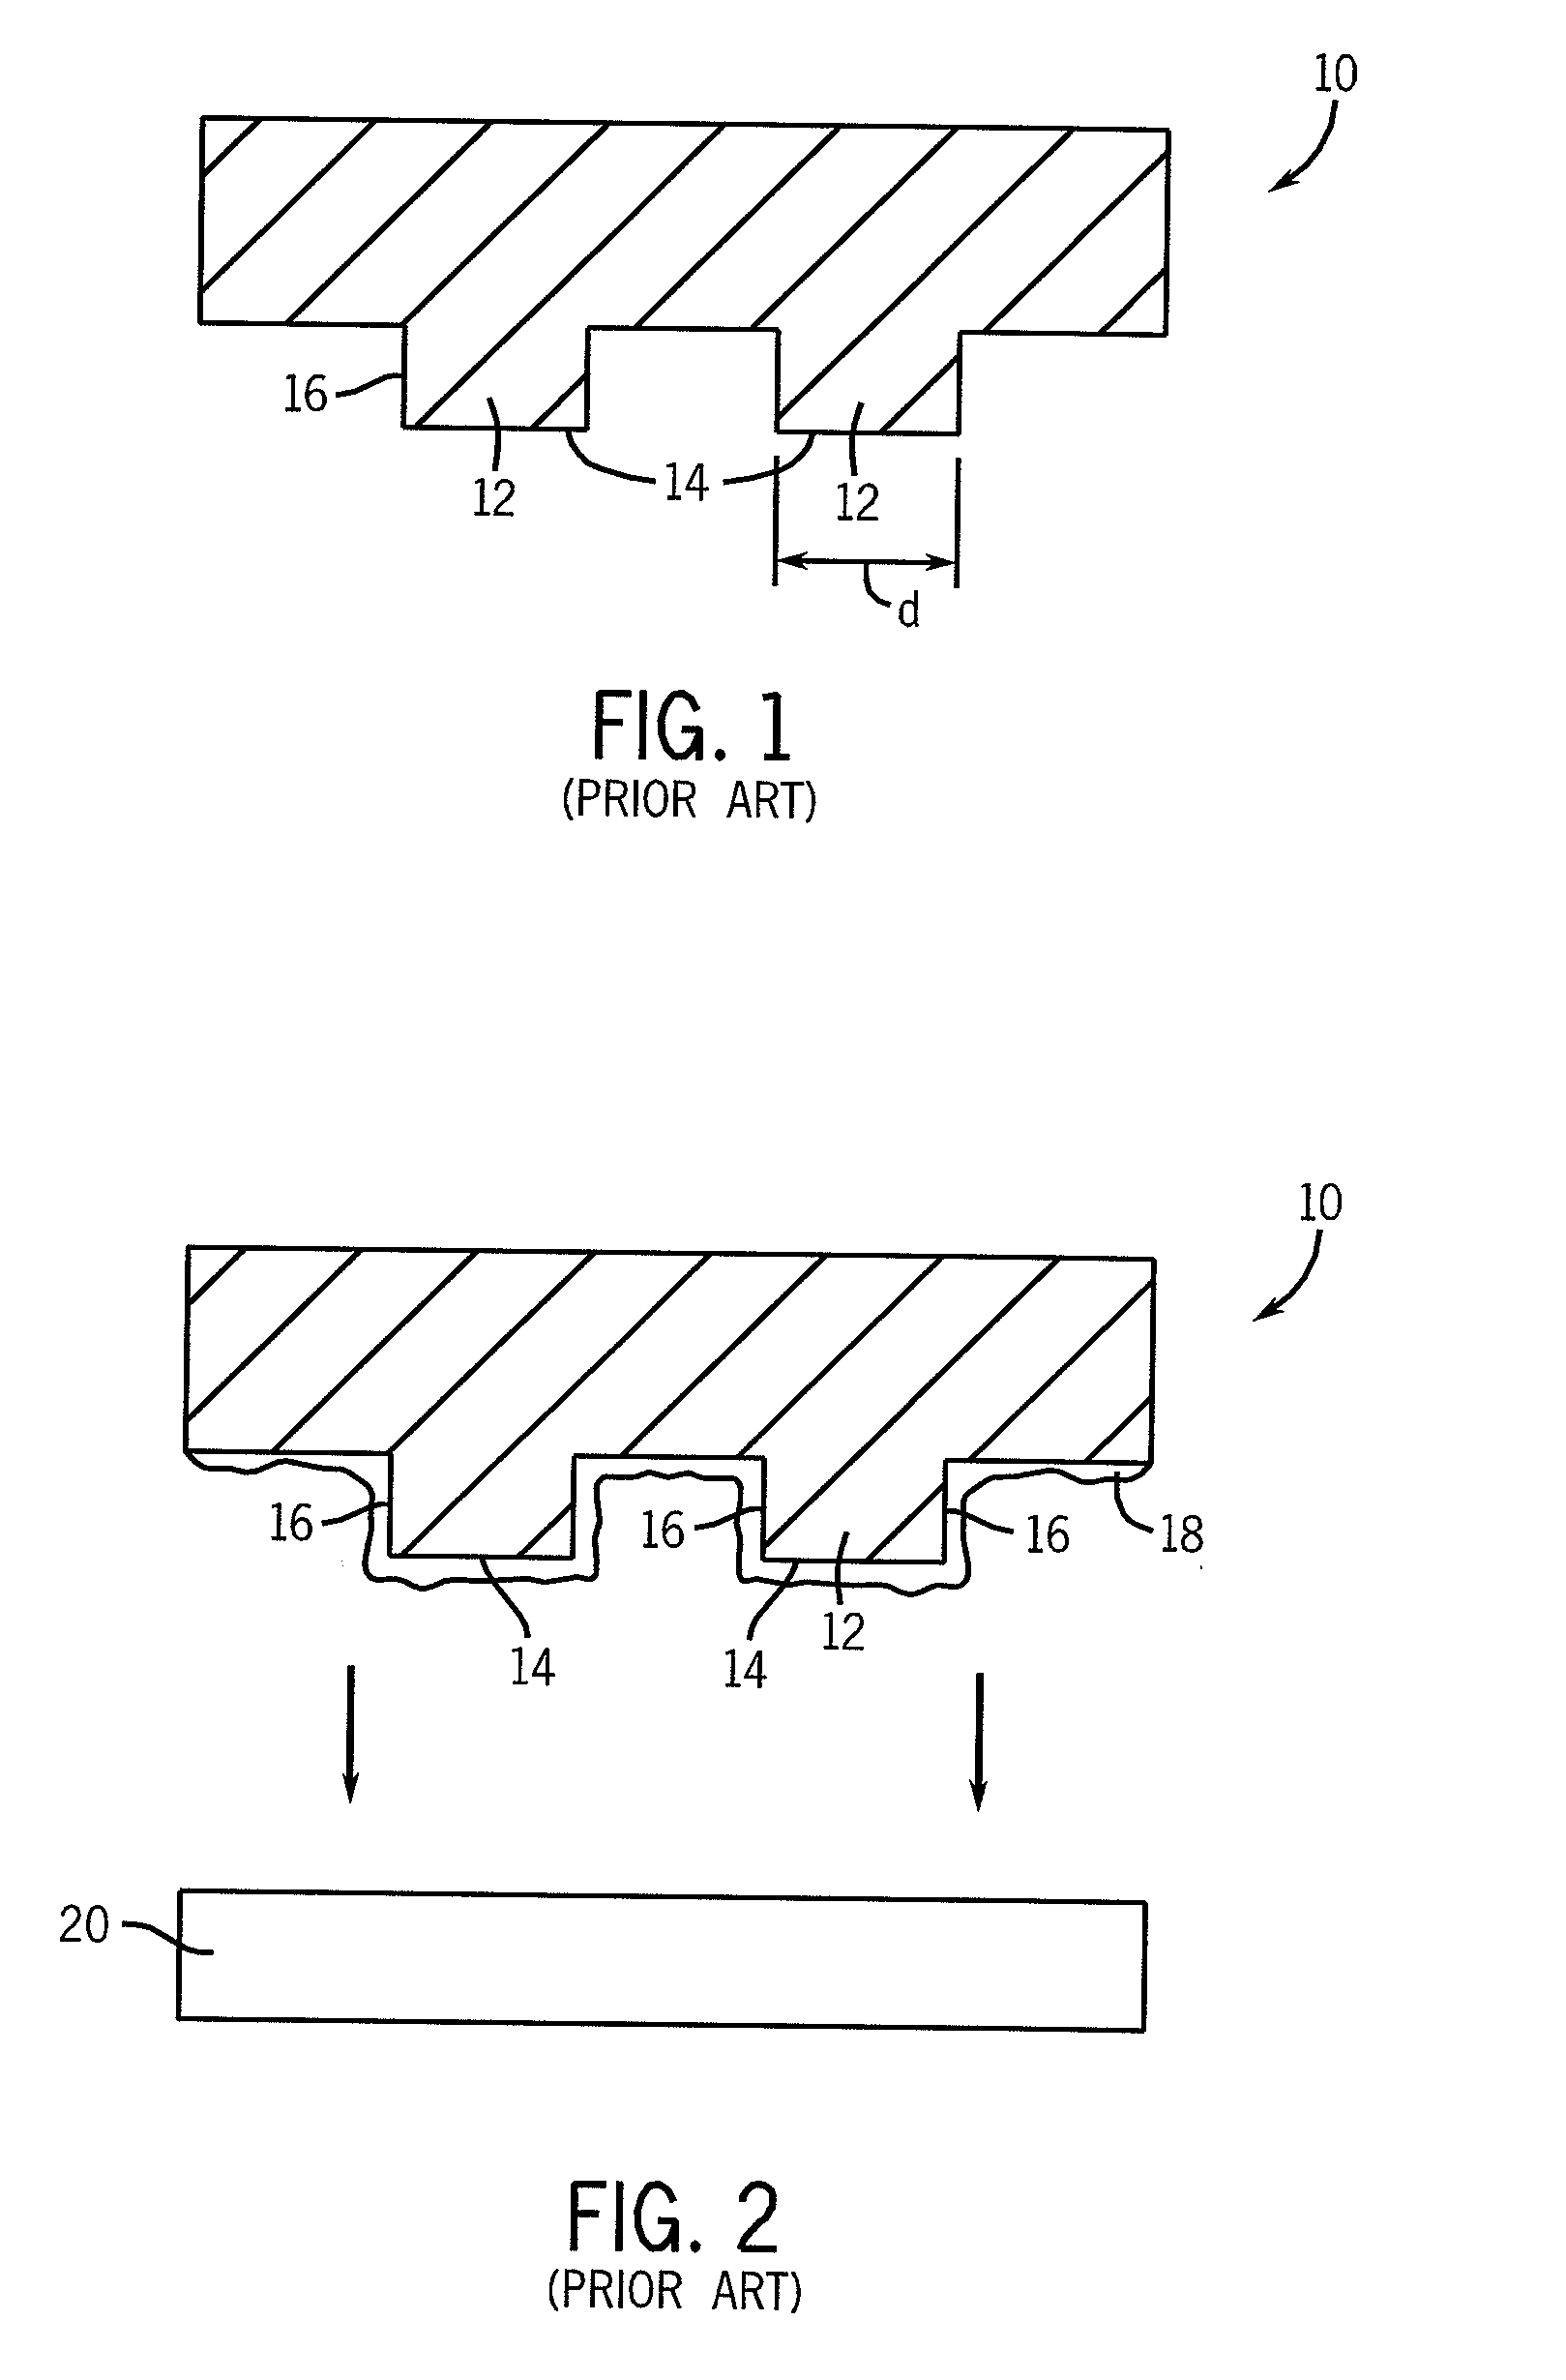 Method to Produce Nanometer-Sized Features with Directed Assembly of Block Copolymers